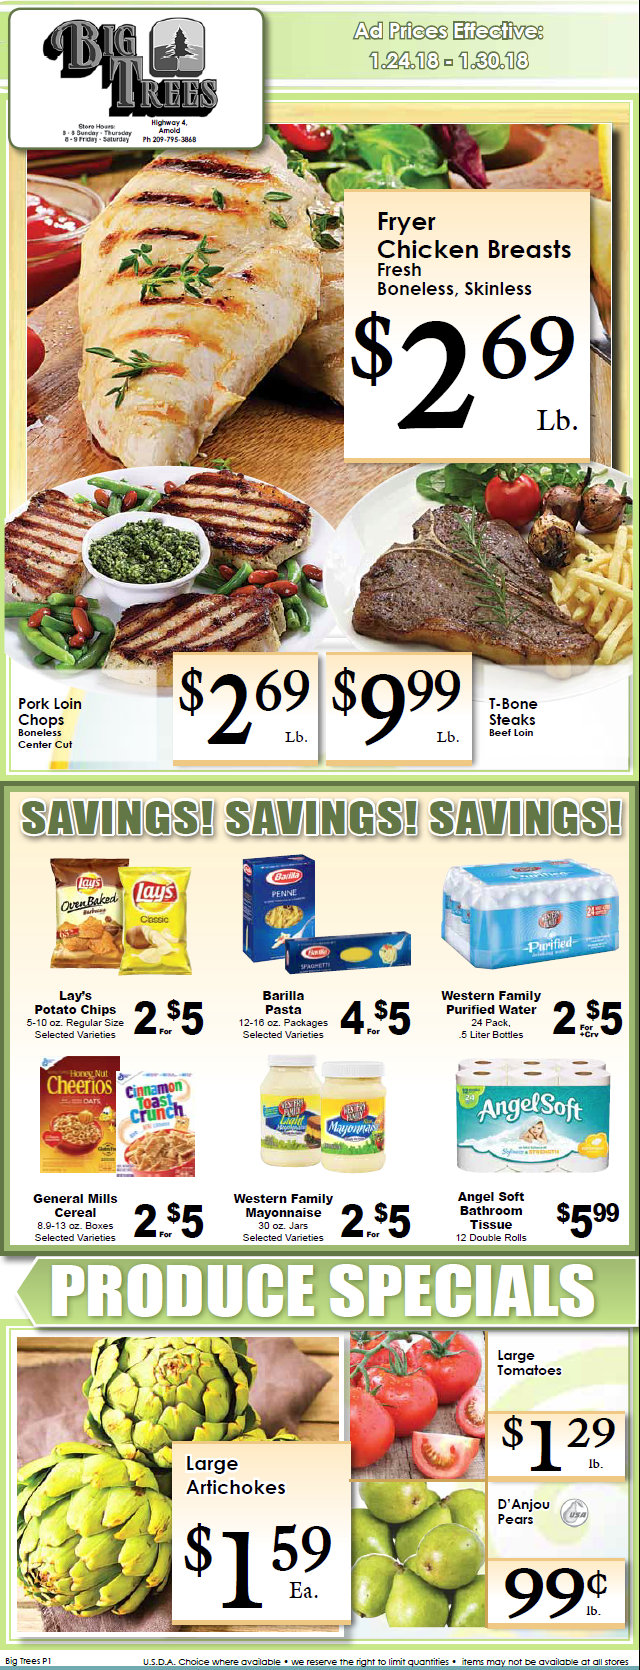 Big Trees Market Weekly Ad & Specials Through January 30th